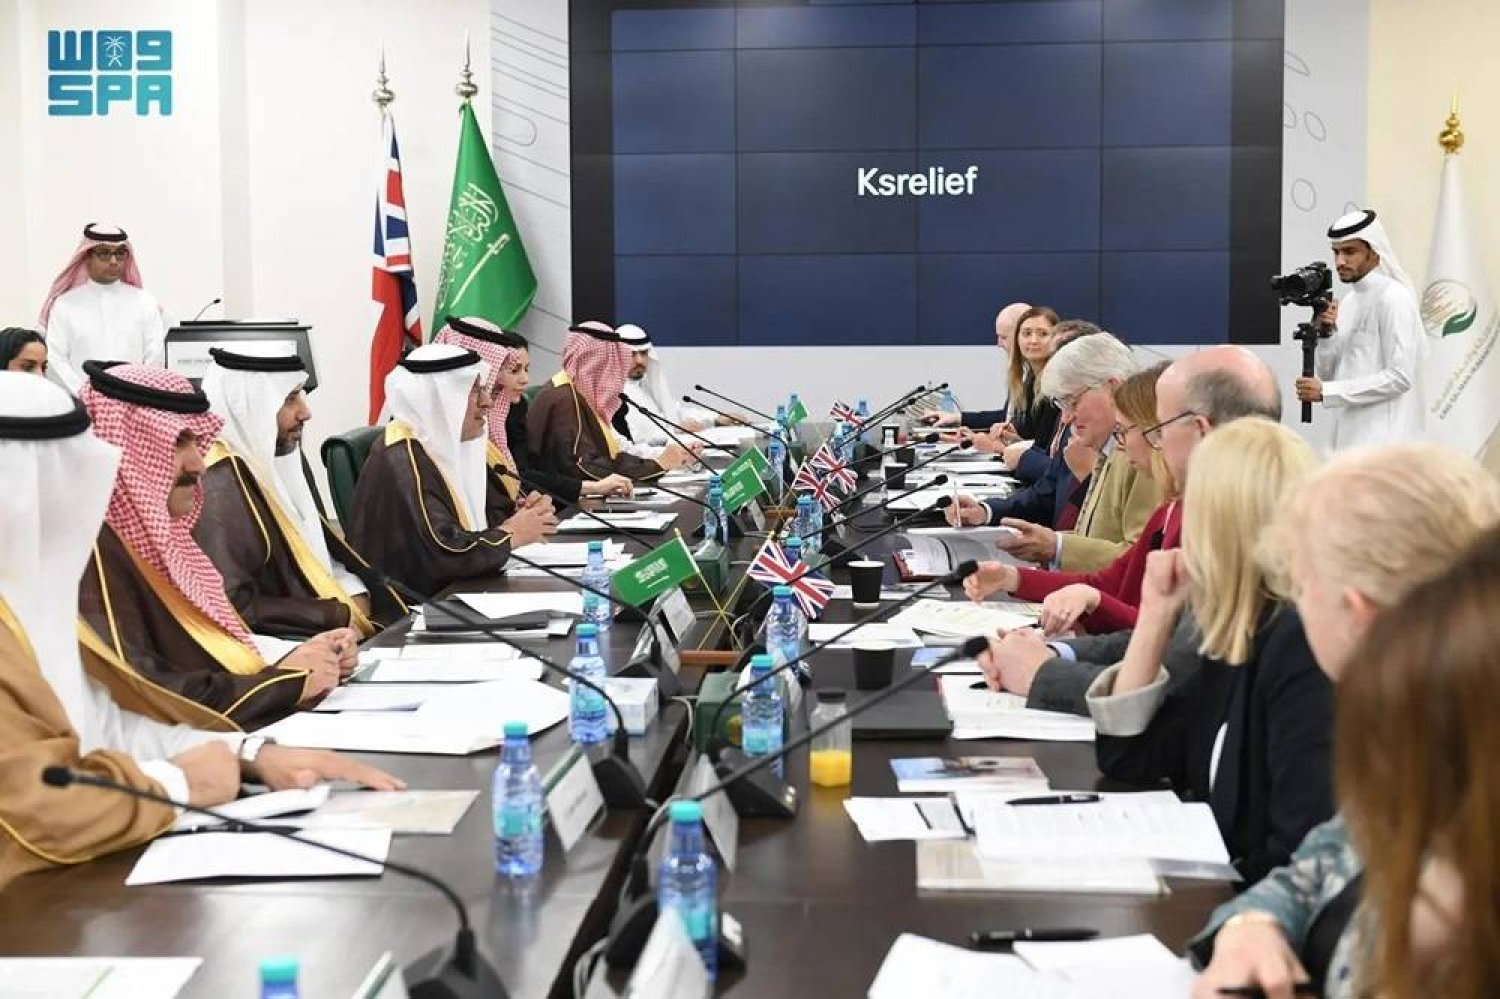 The high-level session of the second Strategic Aid Dialogue on International Development and Humanitarian Aid between Saudi Arabia and Britain kicked off on Monday at the King Salman Humanitarian Aid and Relief Center (KSrelief) in Riyadh. (SPA)